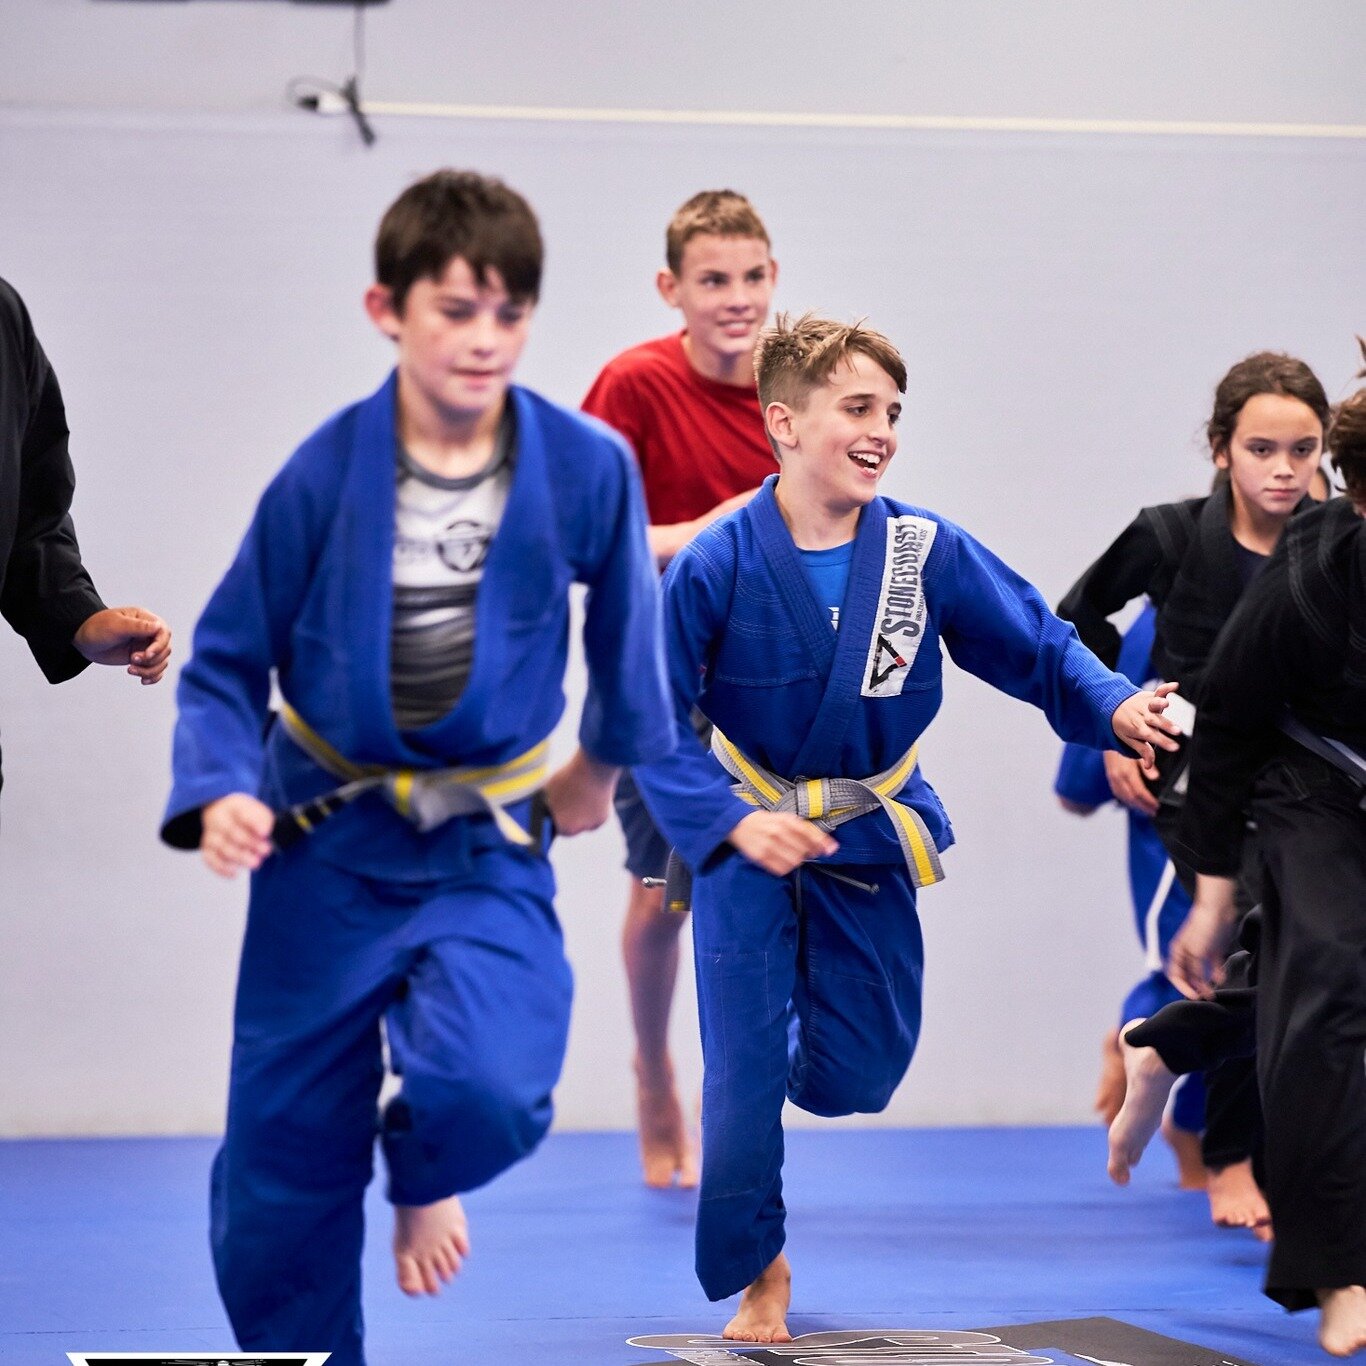 &quot;Every class at Stonecoast Brazilian Jiu Jitsu is an adventure! Challenge yourself, explore new techniques, and enjoy the thrill of learning something new every day. Your adventure awaits! #BJJAdventure #LearnEveryday #StonecoastBJJ&quot;